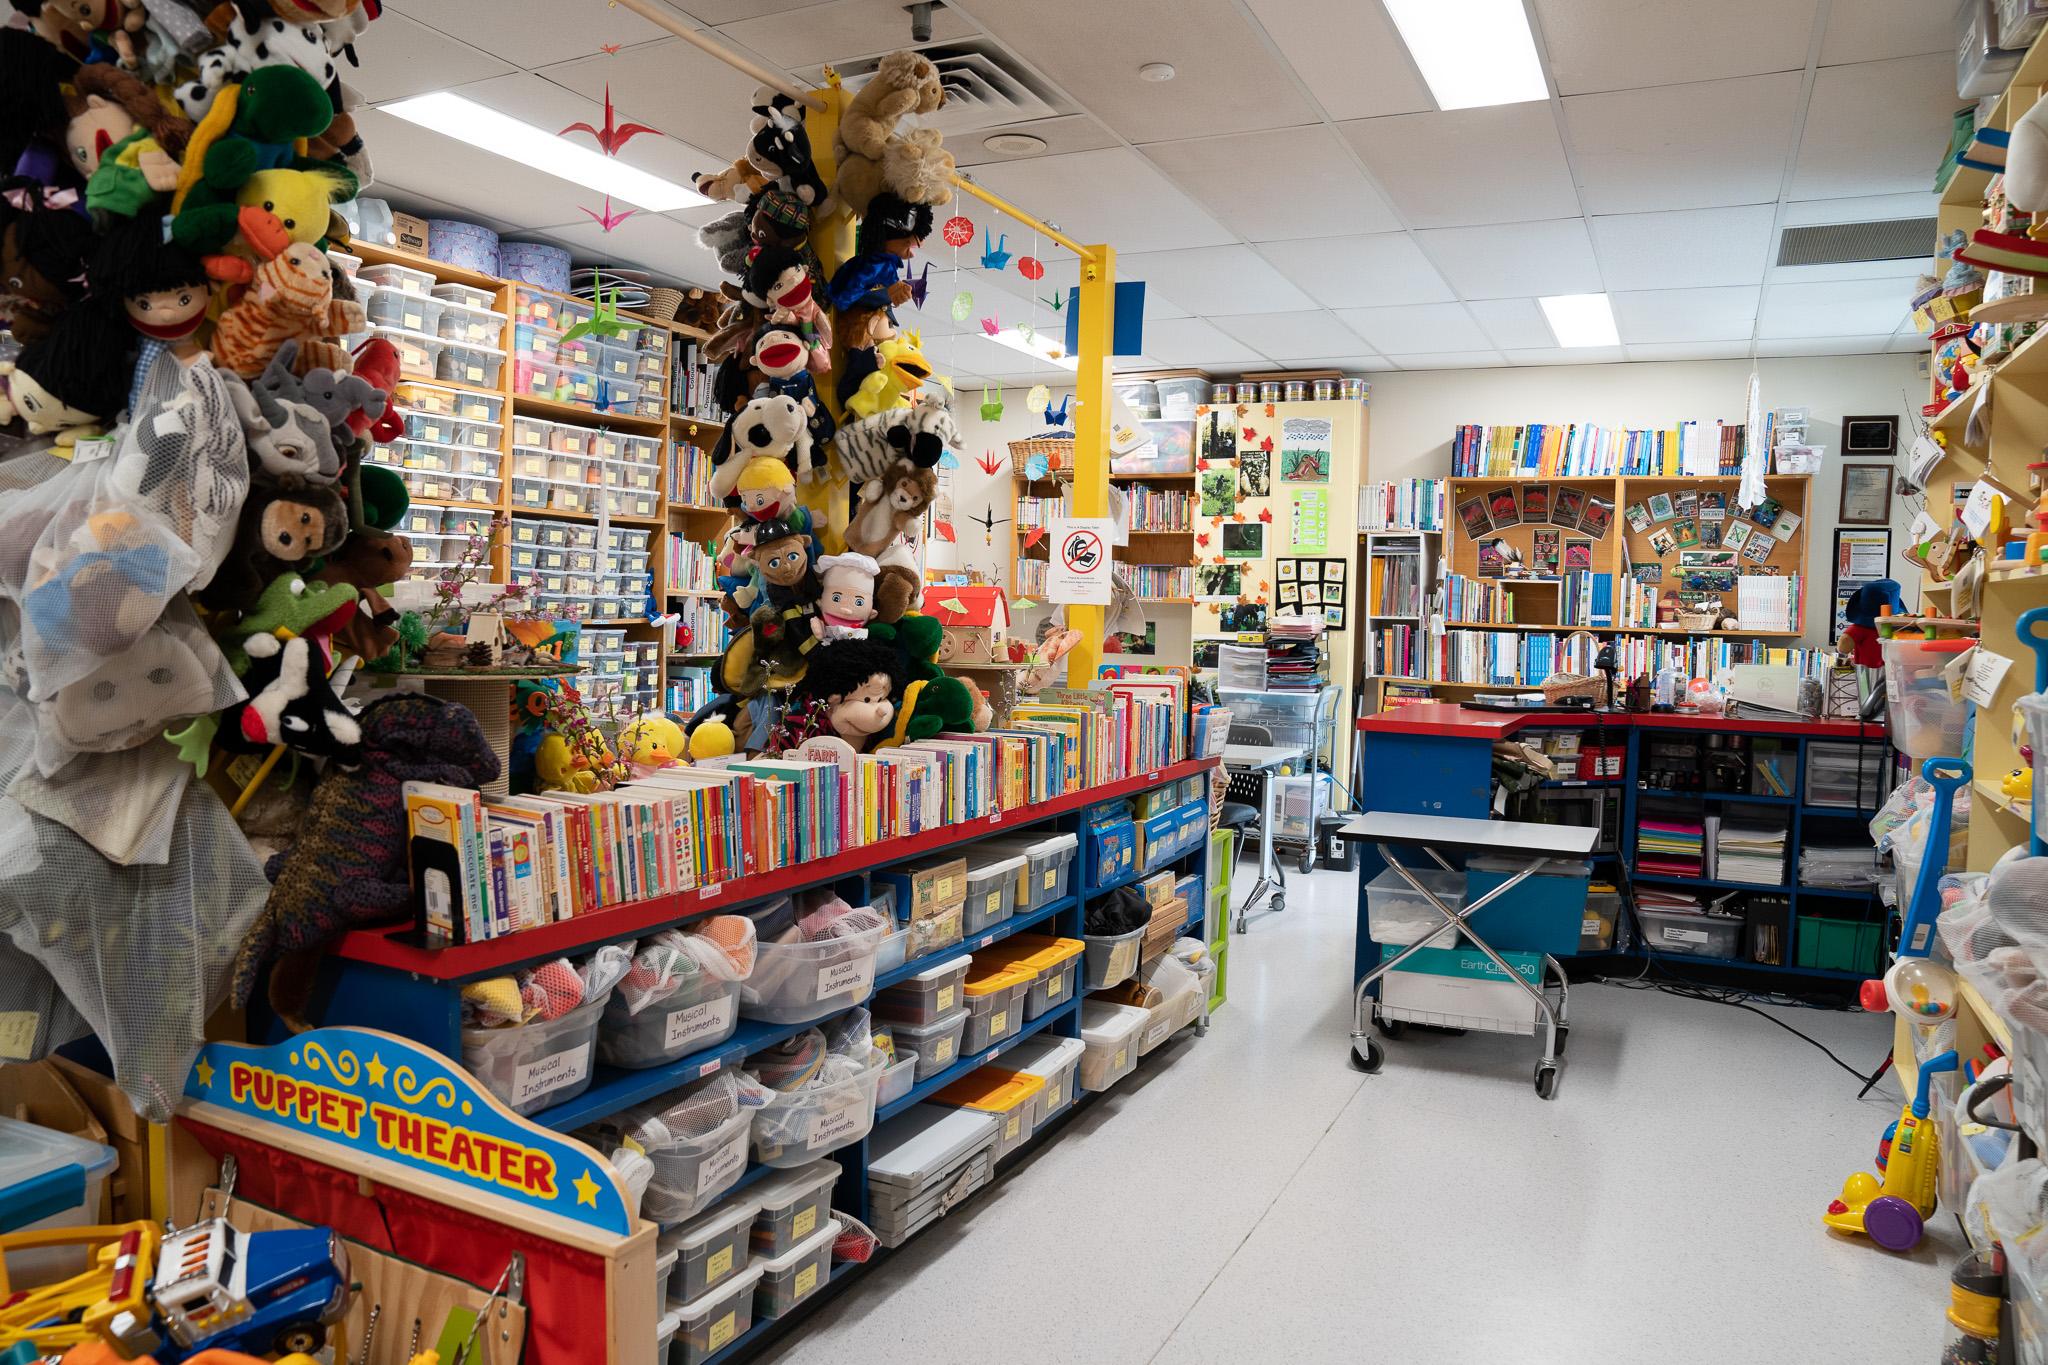 A room full of stuffed animals, children’s toys, books and arts and crafts supplies.